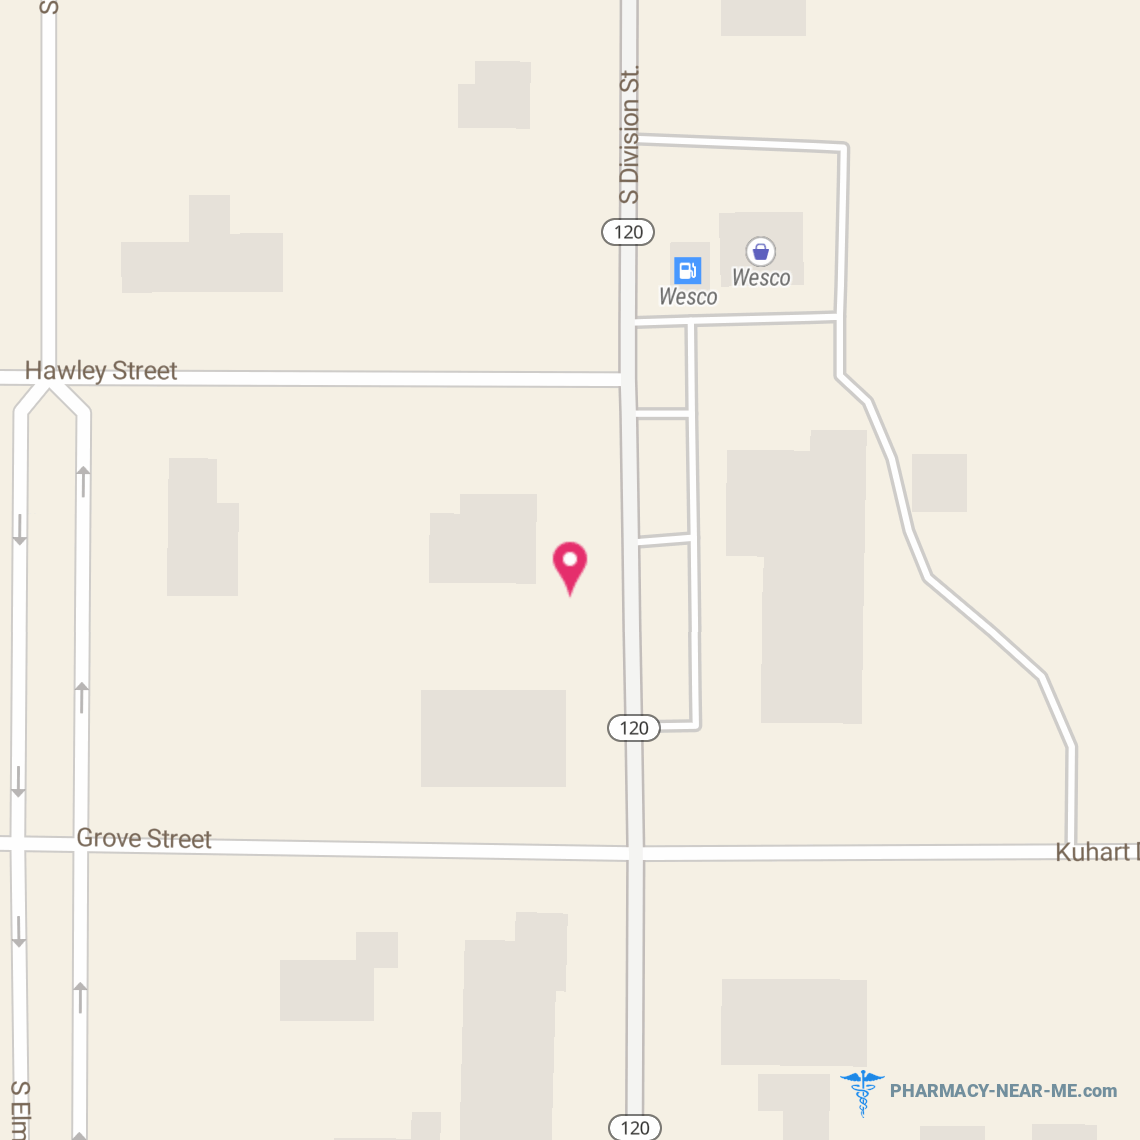 BOB'S DRUGS - Pharmacy Hours, Phone, Reviews & Information: 194 N Division Ave, Hesperia, Michigan 49421, United States